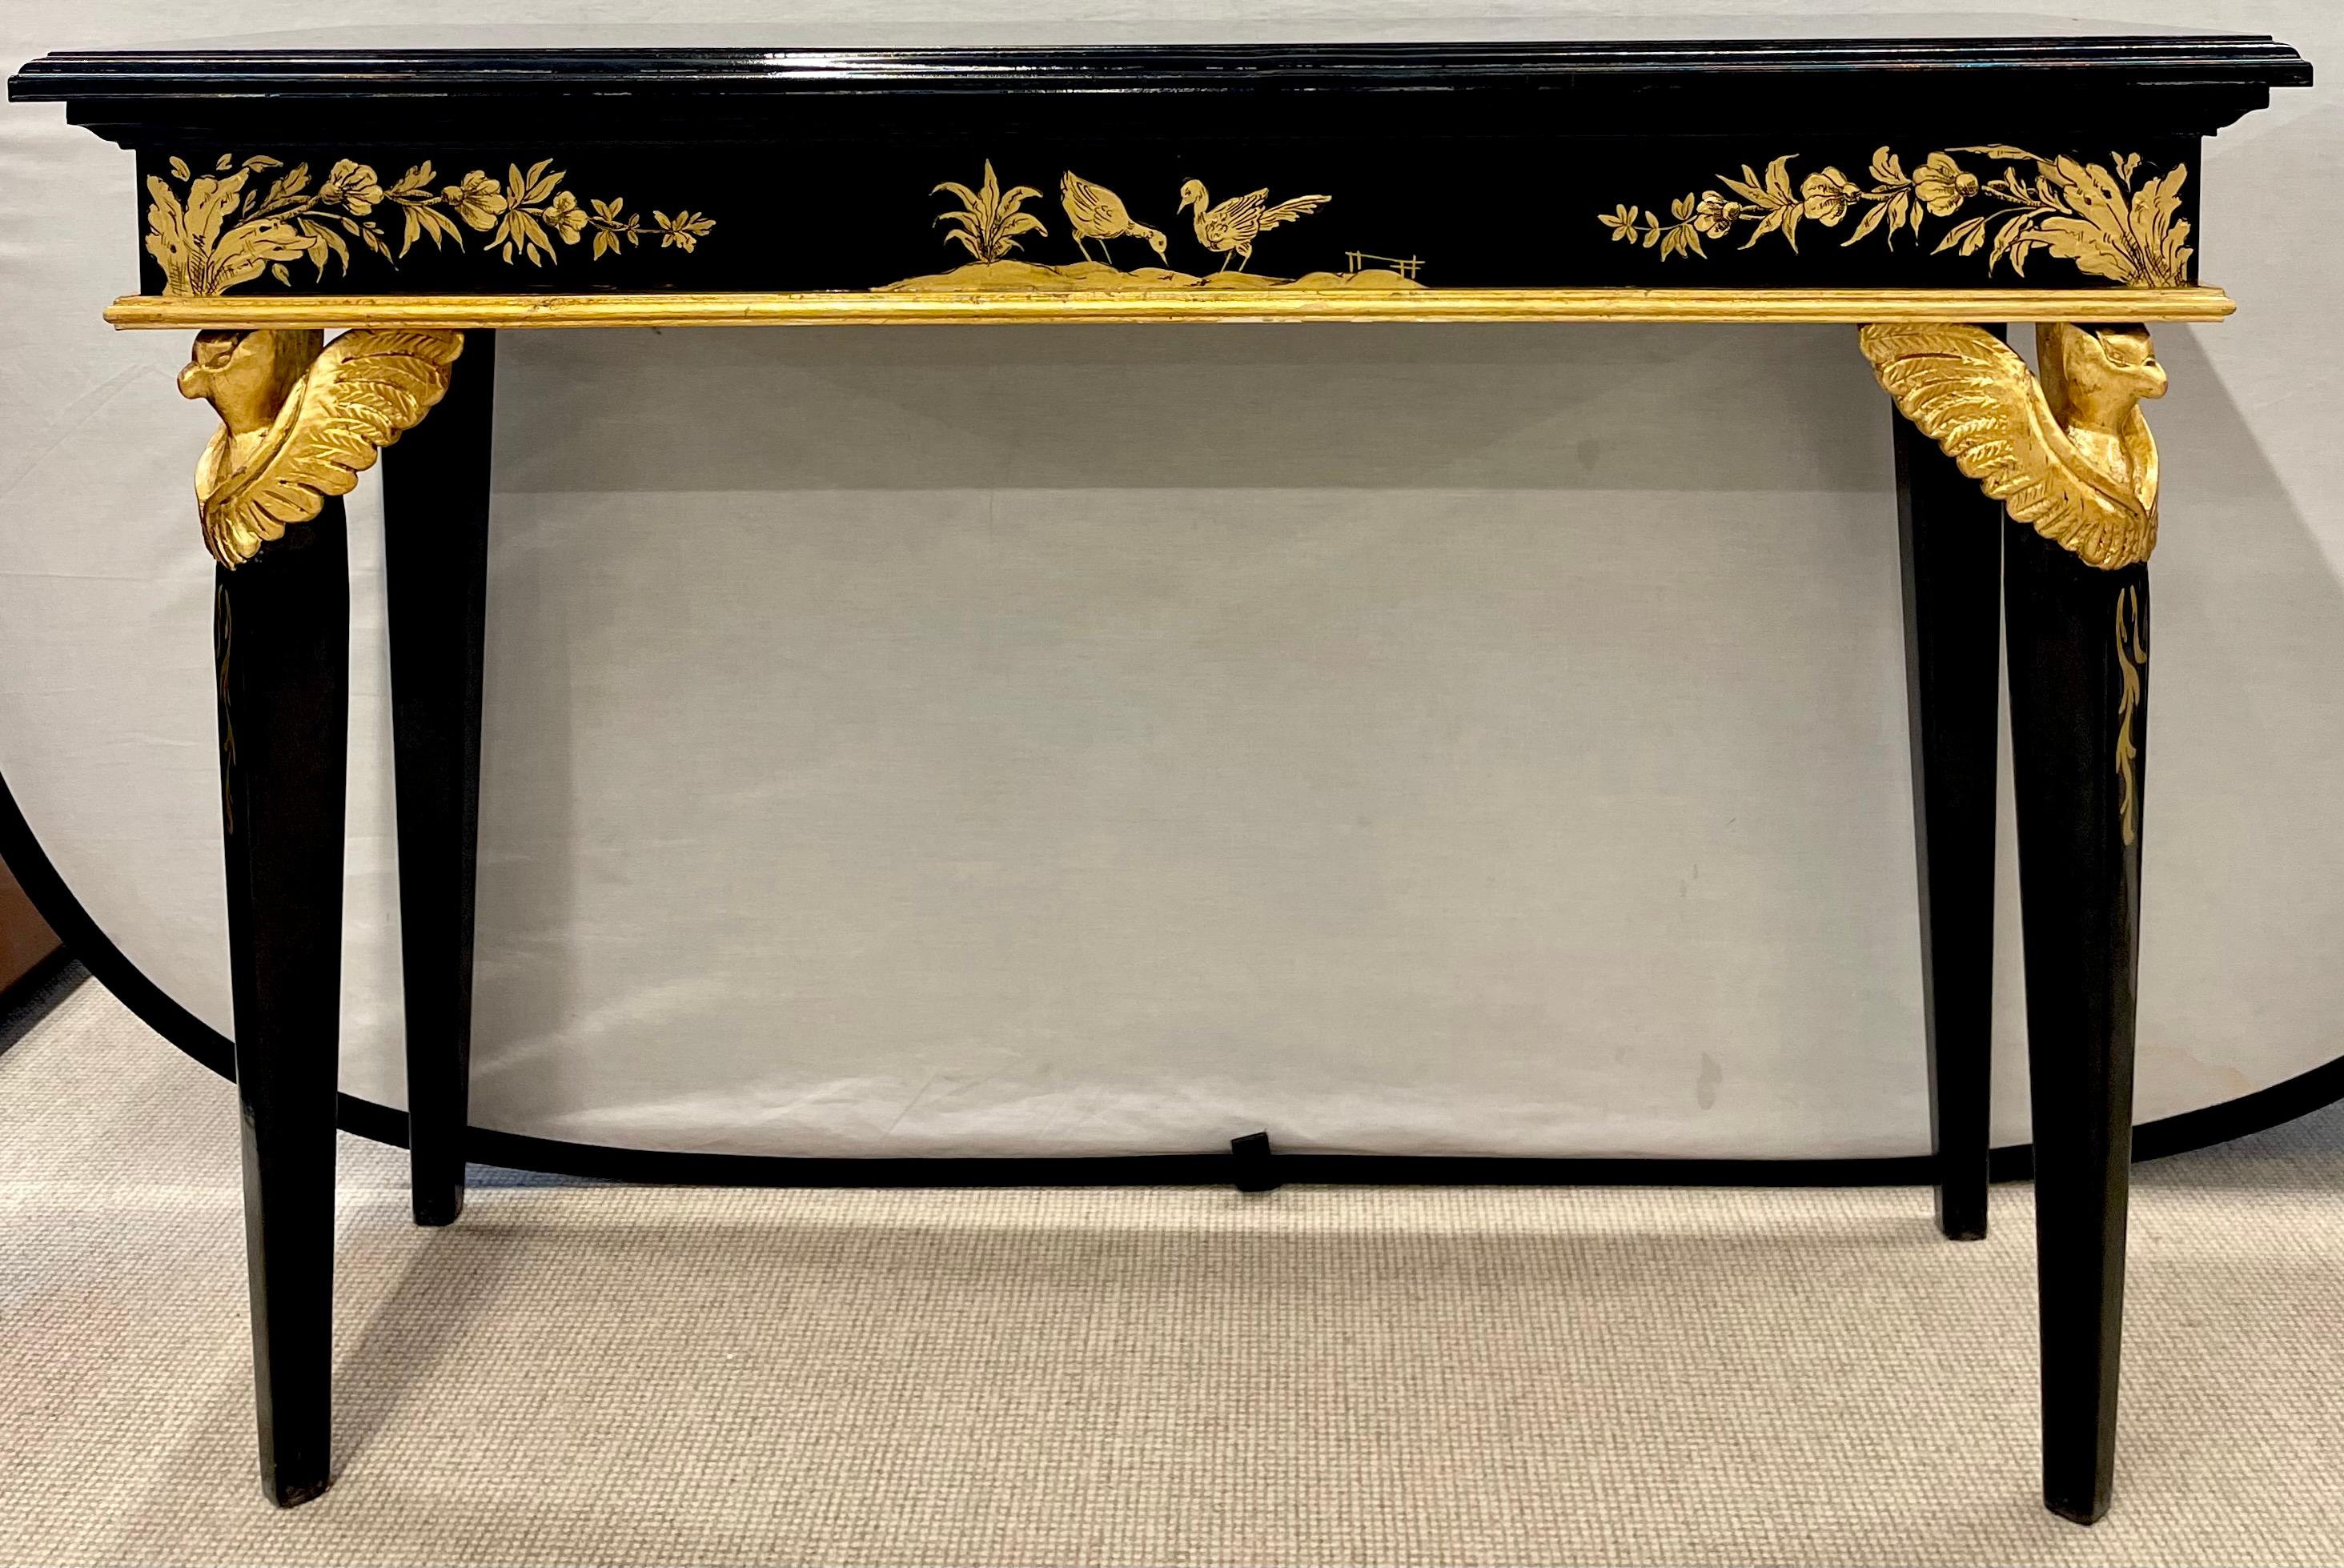 Pair of Hollywood Regency Style Ebony and Gilt Decorated Sofa Console tables. The pair having Figural winged birds on the corner of the legs.